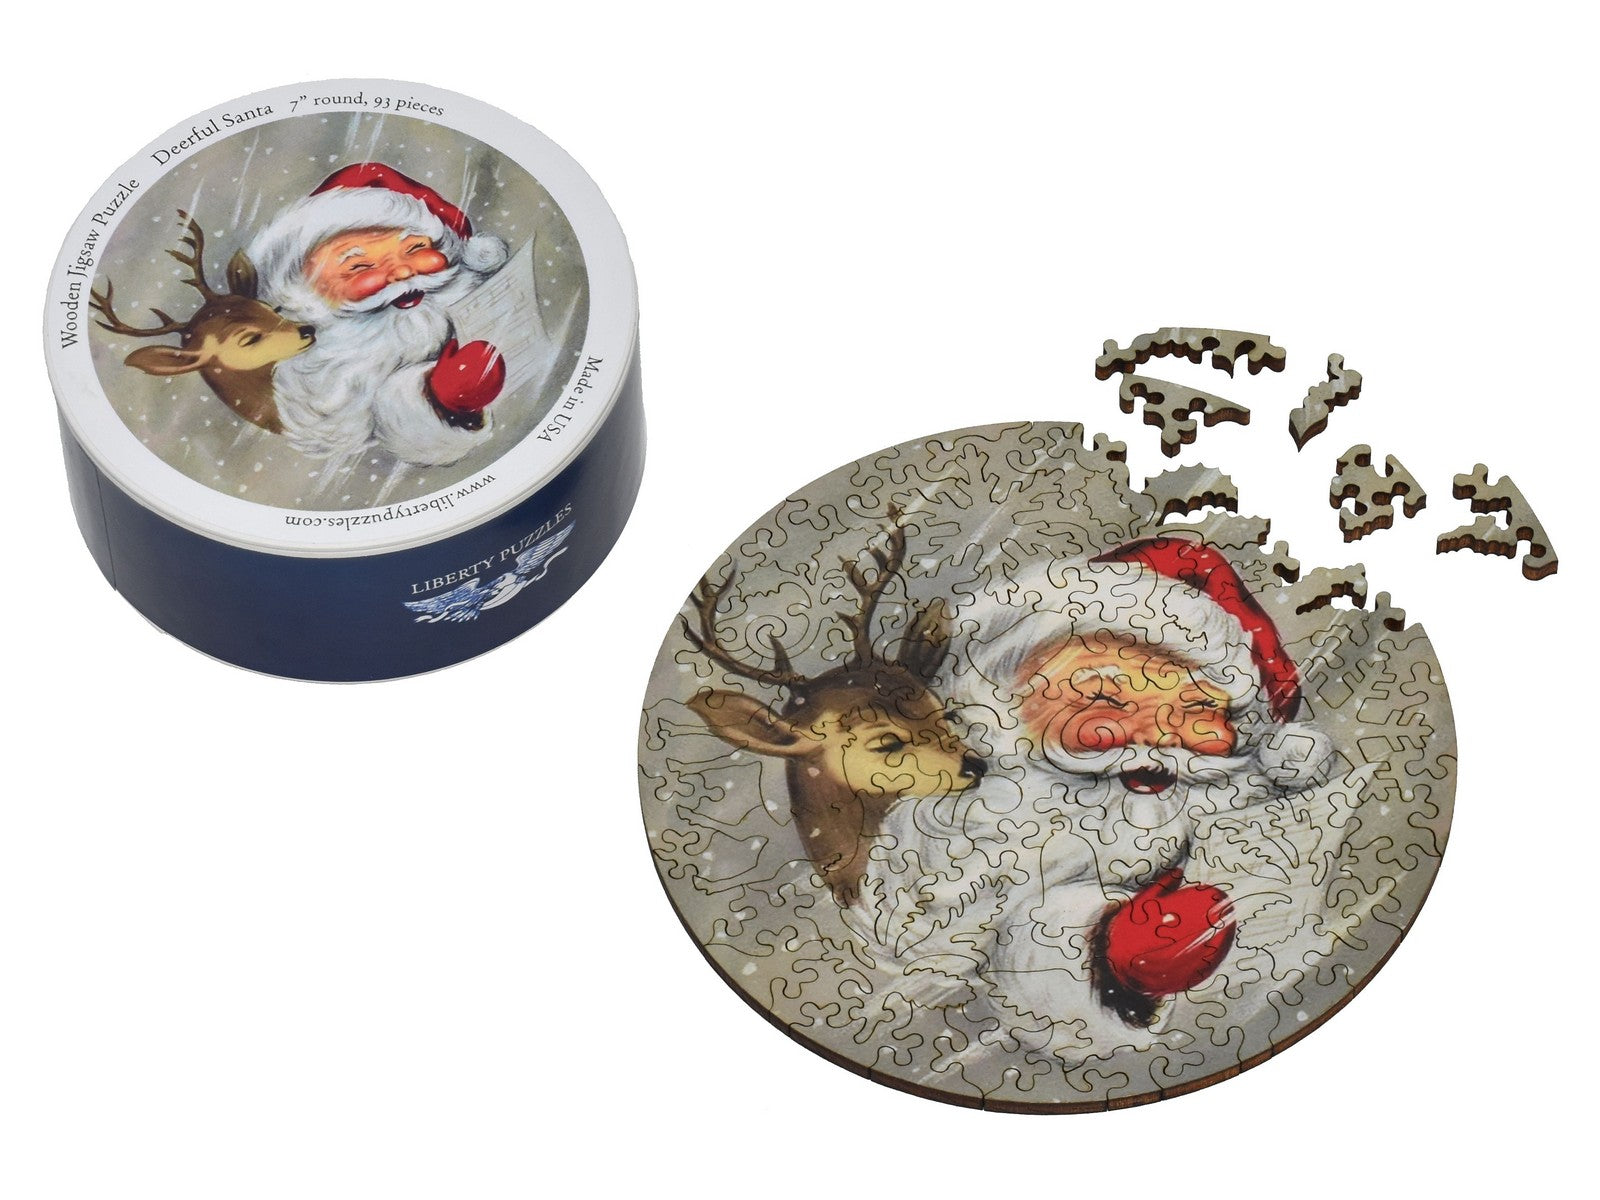 The front of the small round puzzle, Deerful Santa, with Santa and a reindeer.